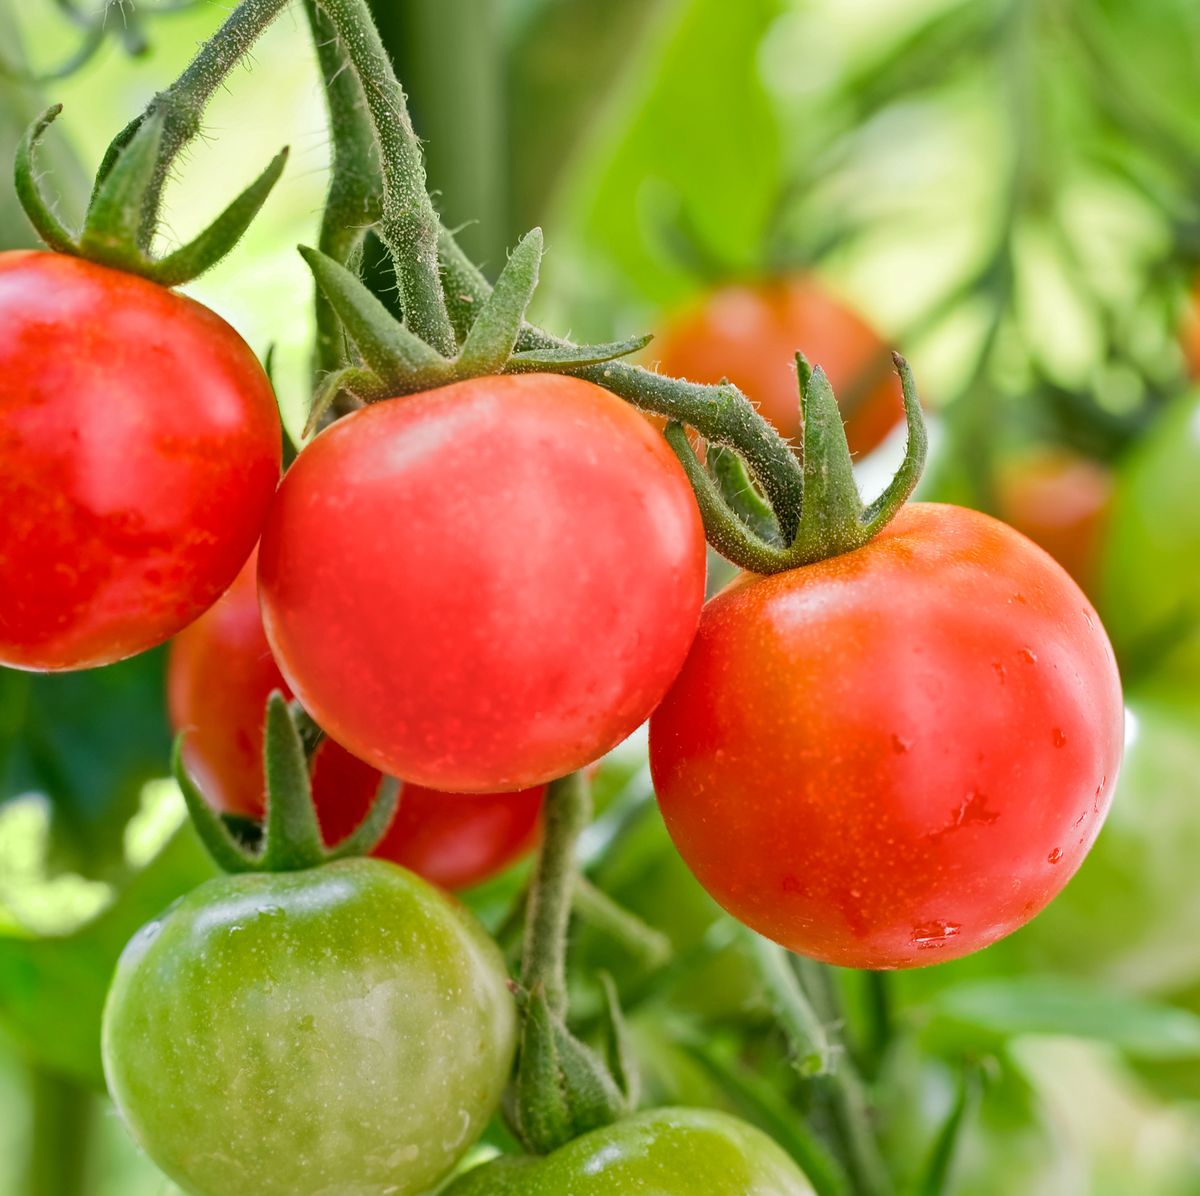 How to Grow Cherry Tomatoes - Planting and Harvesting Cherry